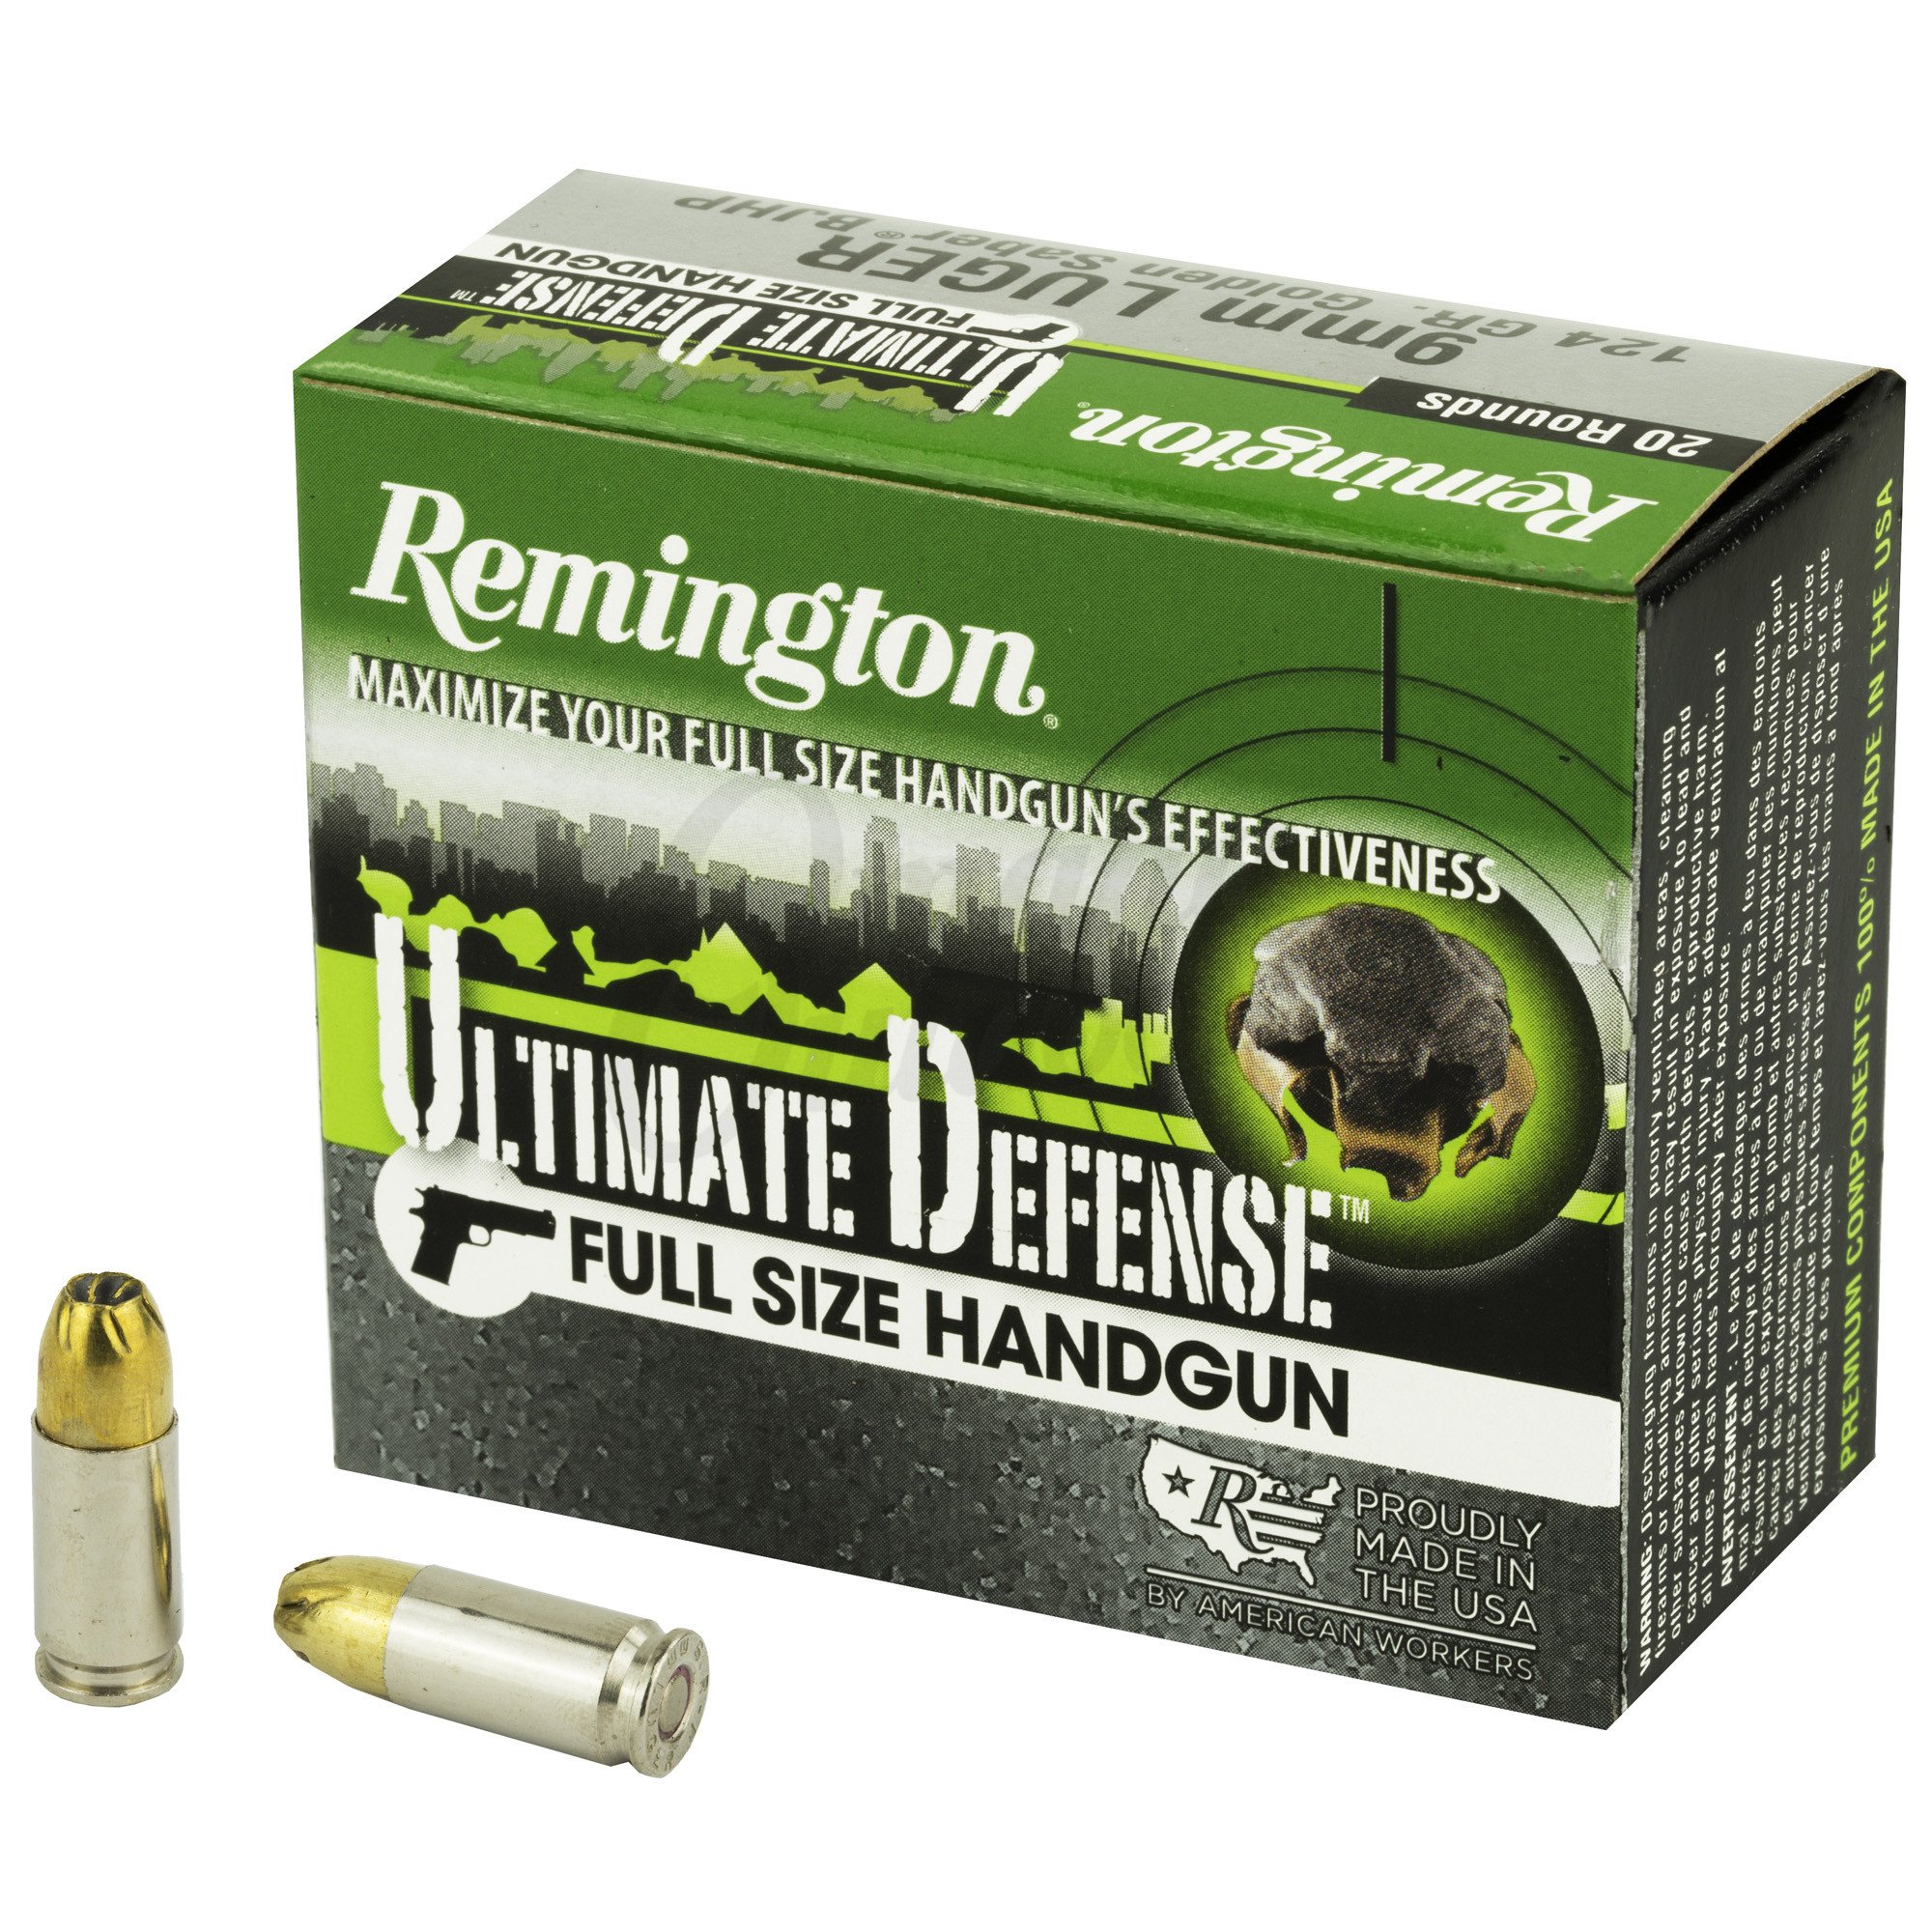 Remington Ultimate Defense 9mm Ammo 124 Grain Brass Jhp 20 Rounds Omaha Outdoors